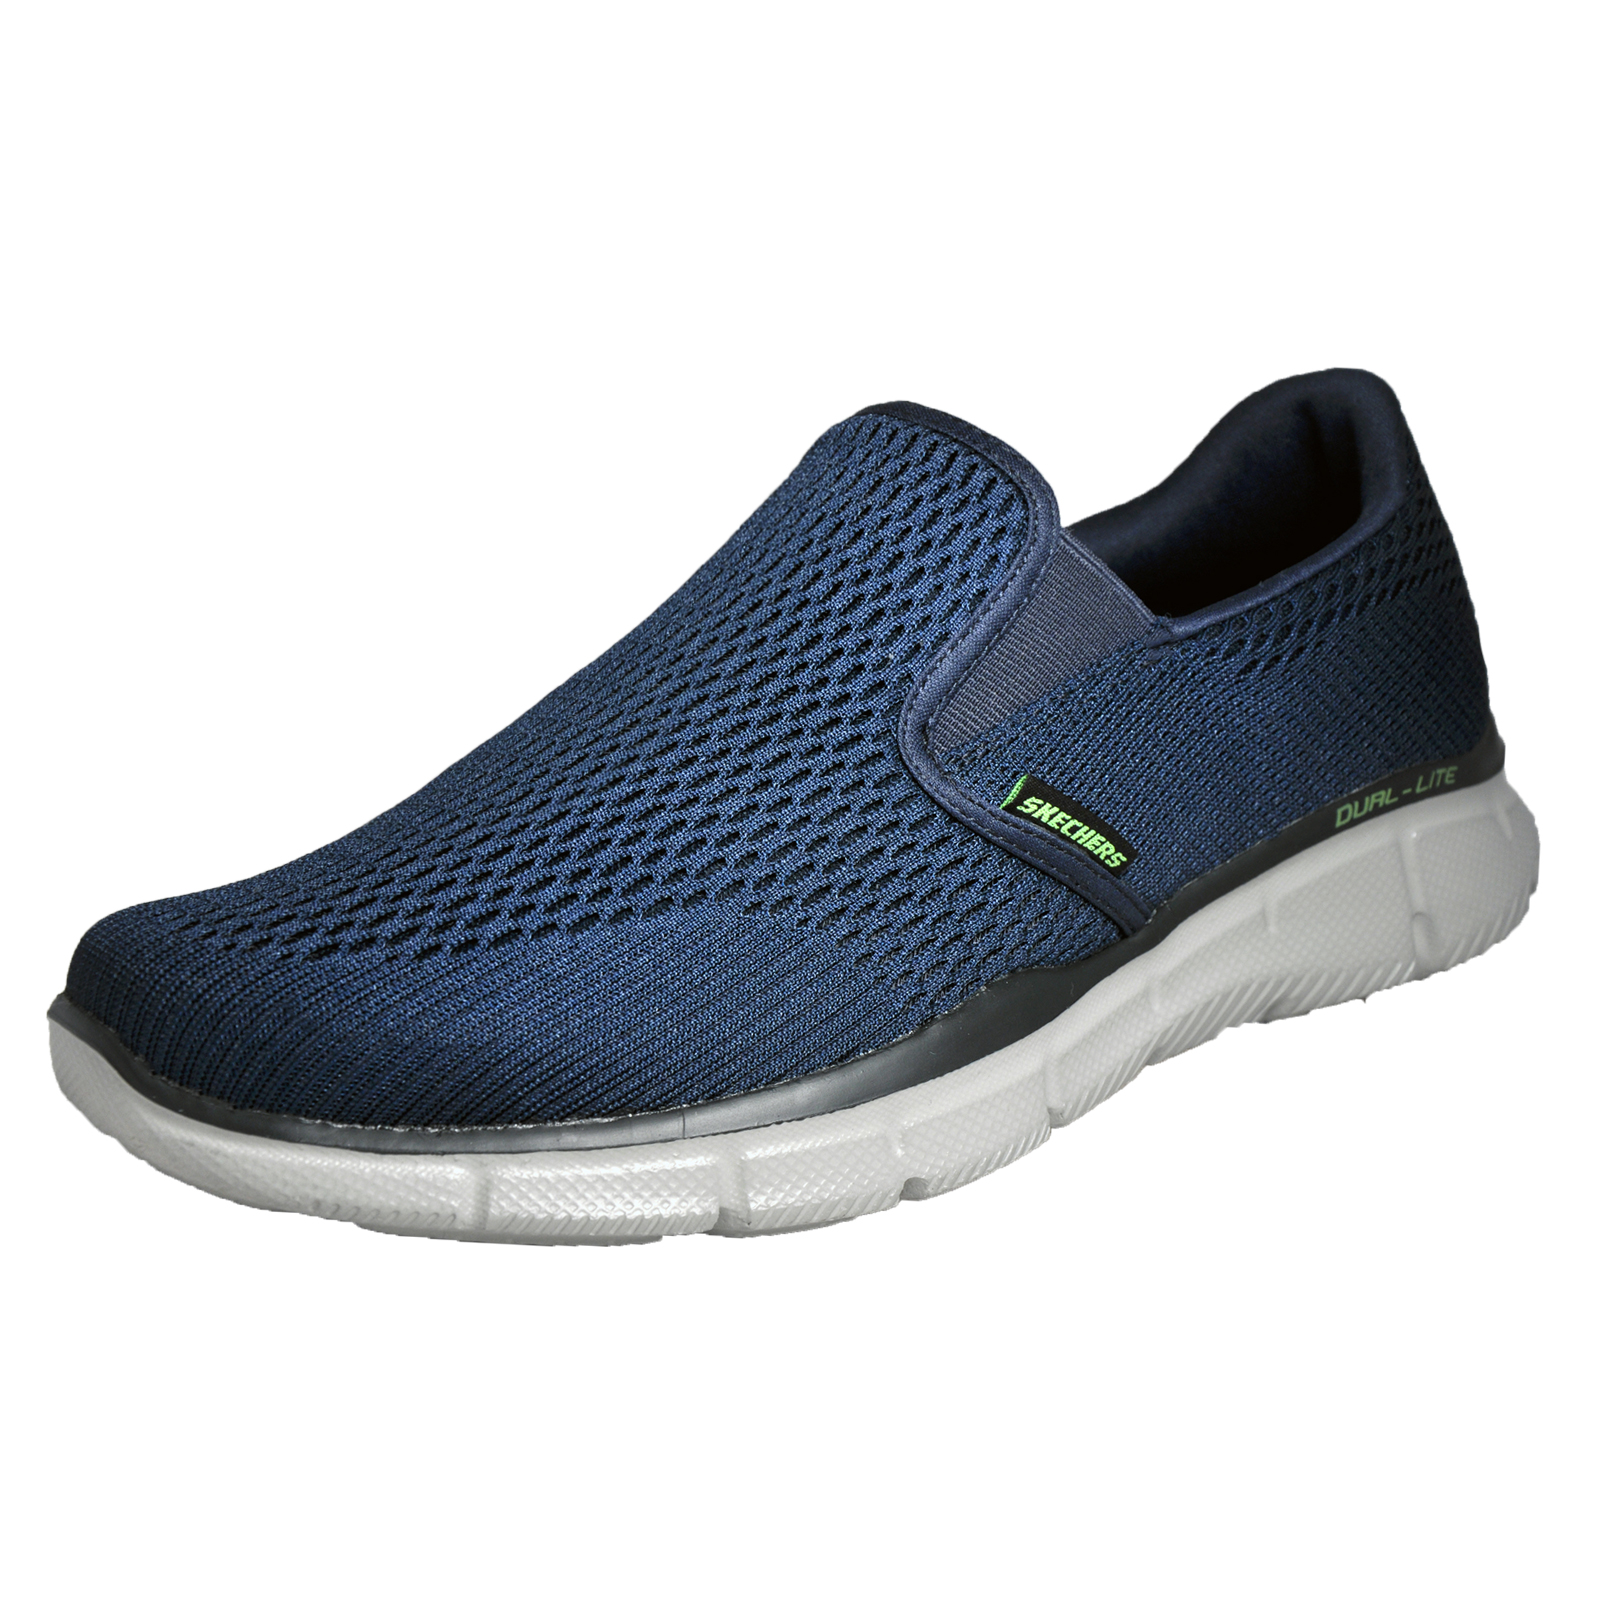 Skechers Equalizer Memory Foam Mens Casual Fitness Slip On Trainers ...